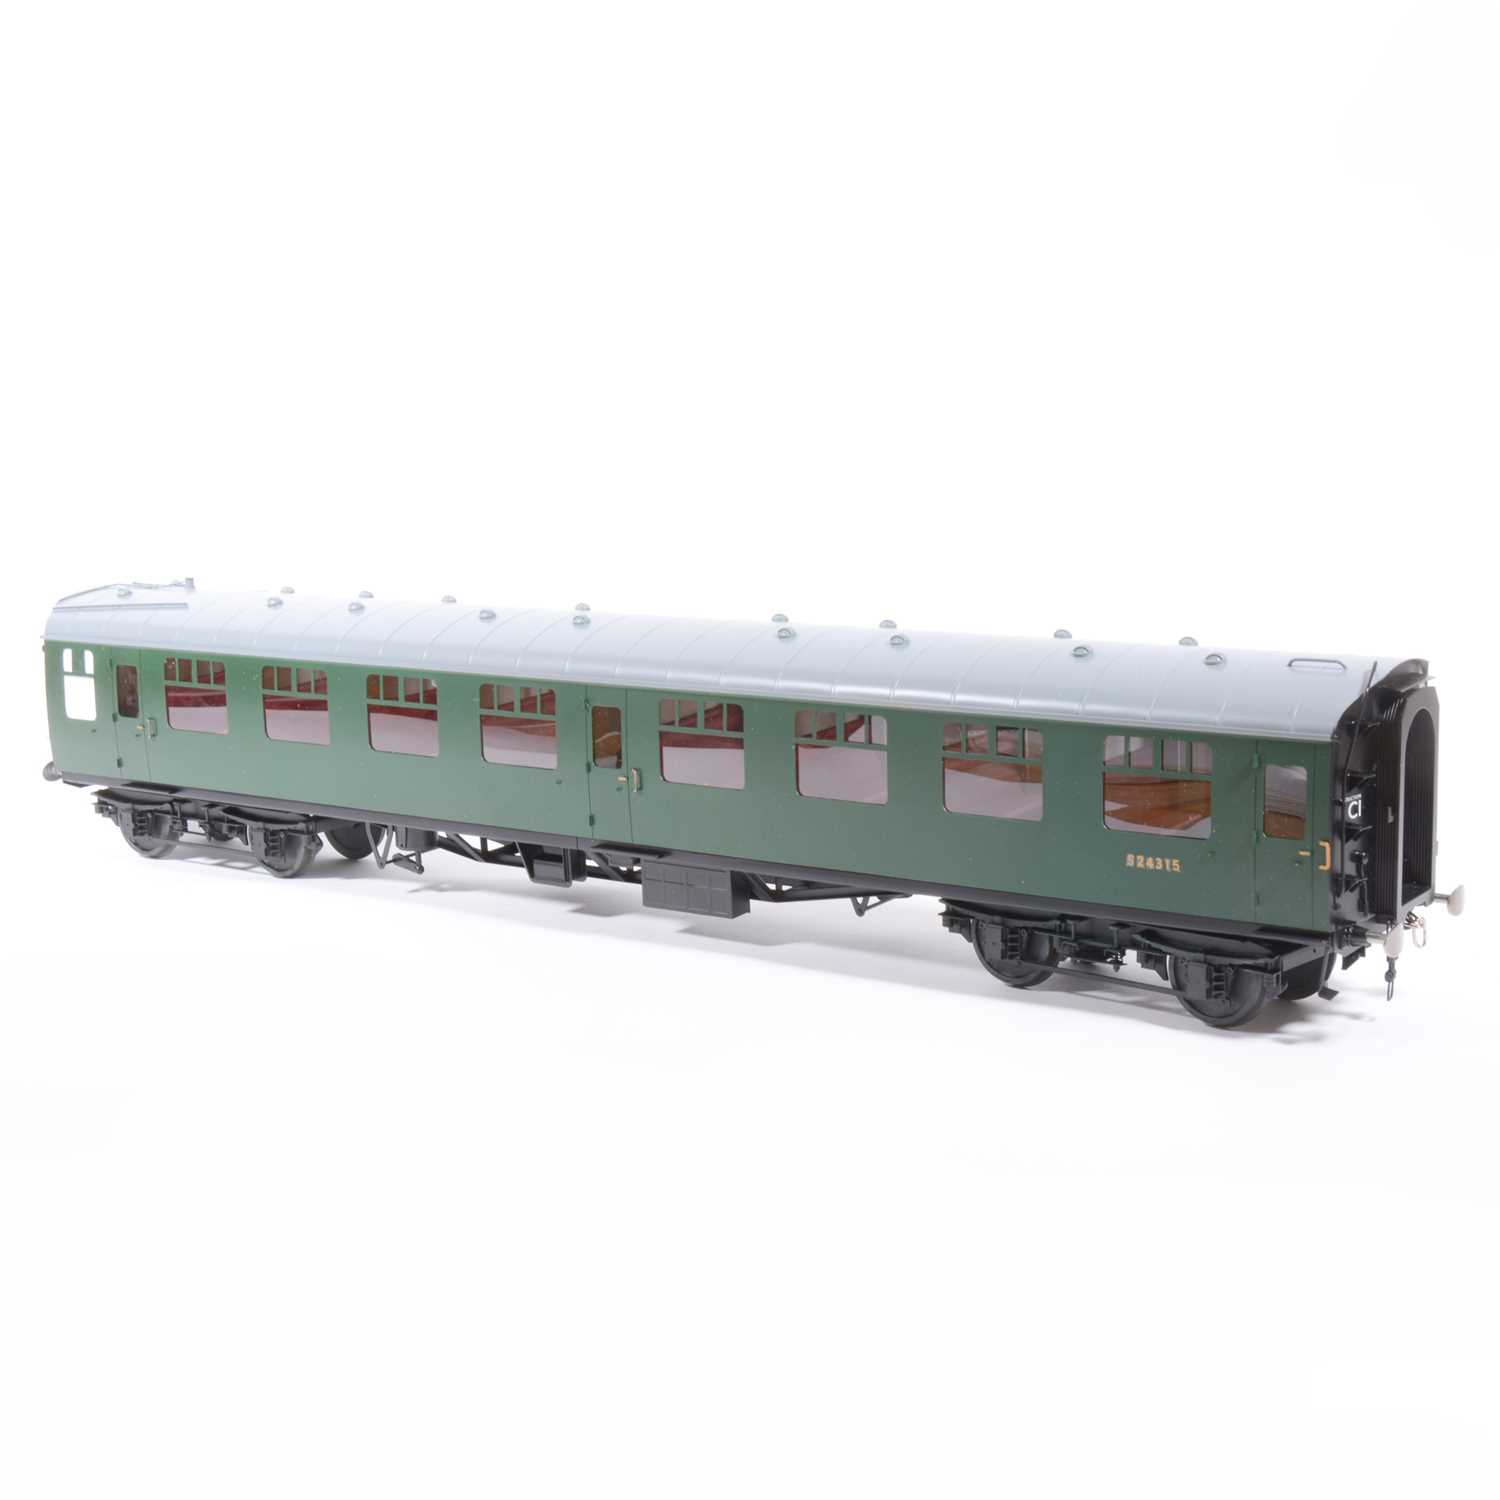 Lot 67 - Tower Brass Models, gauge 1 / G scale, 45mm passenger coach, BR green no.S24315, boxed.